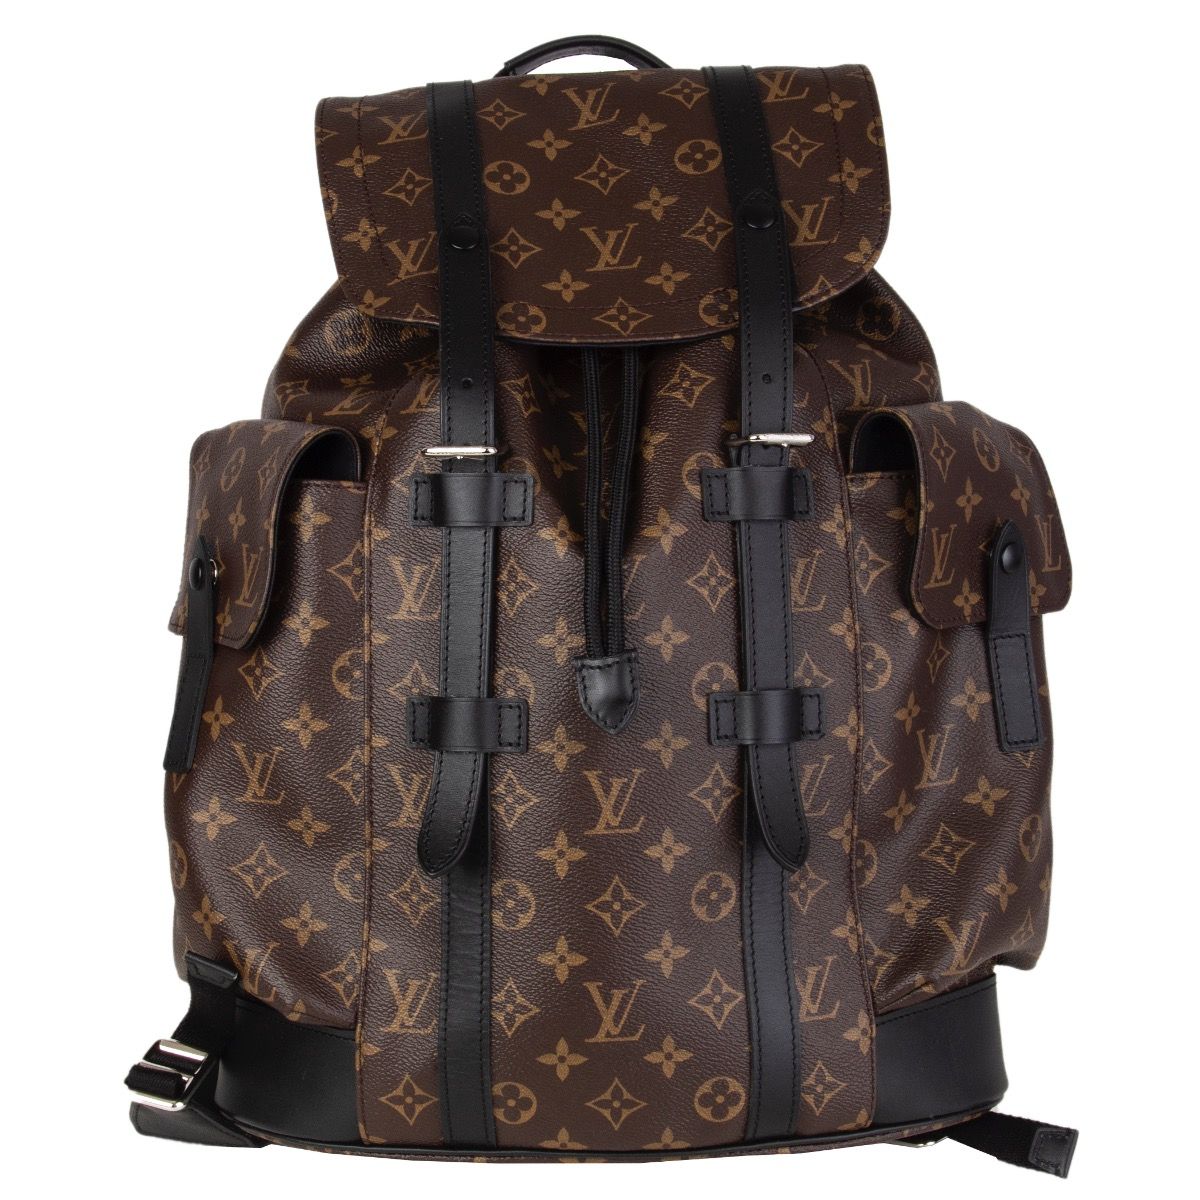 louis vuitton backpack cost